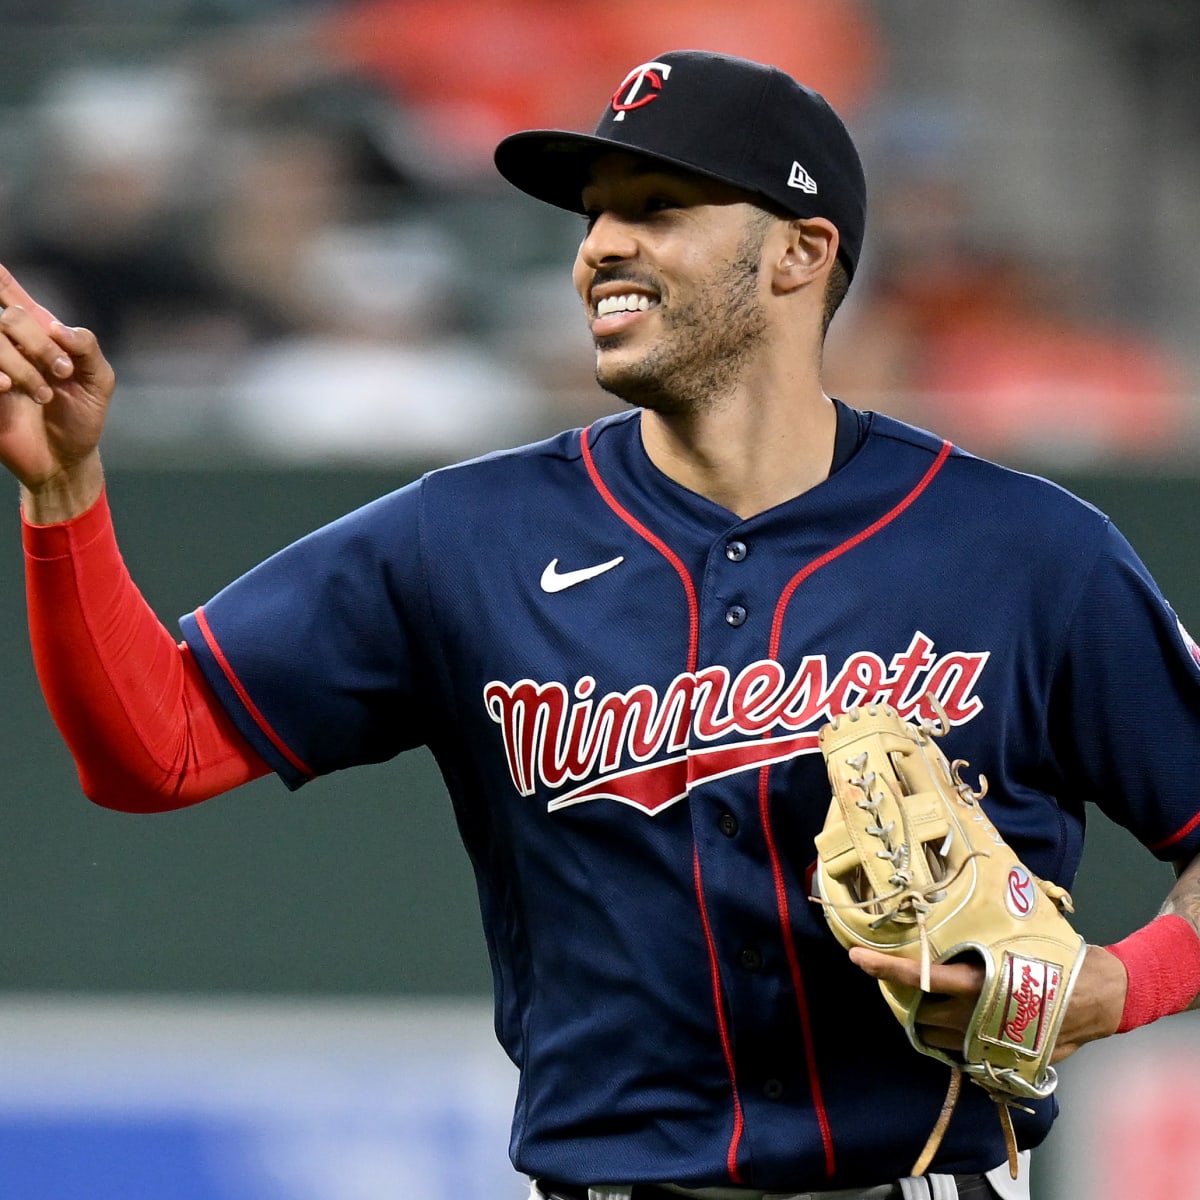 Minnesota Twins SIGN Dansby Swanson  Dansby Swanson Minnesota Twins   Twins Are Interested  YouTube